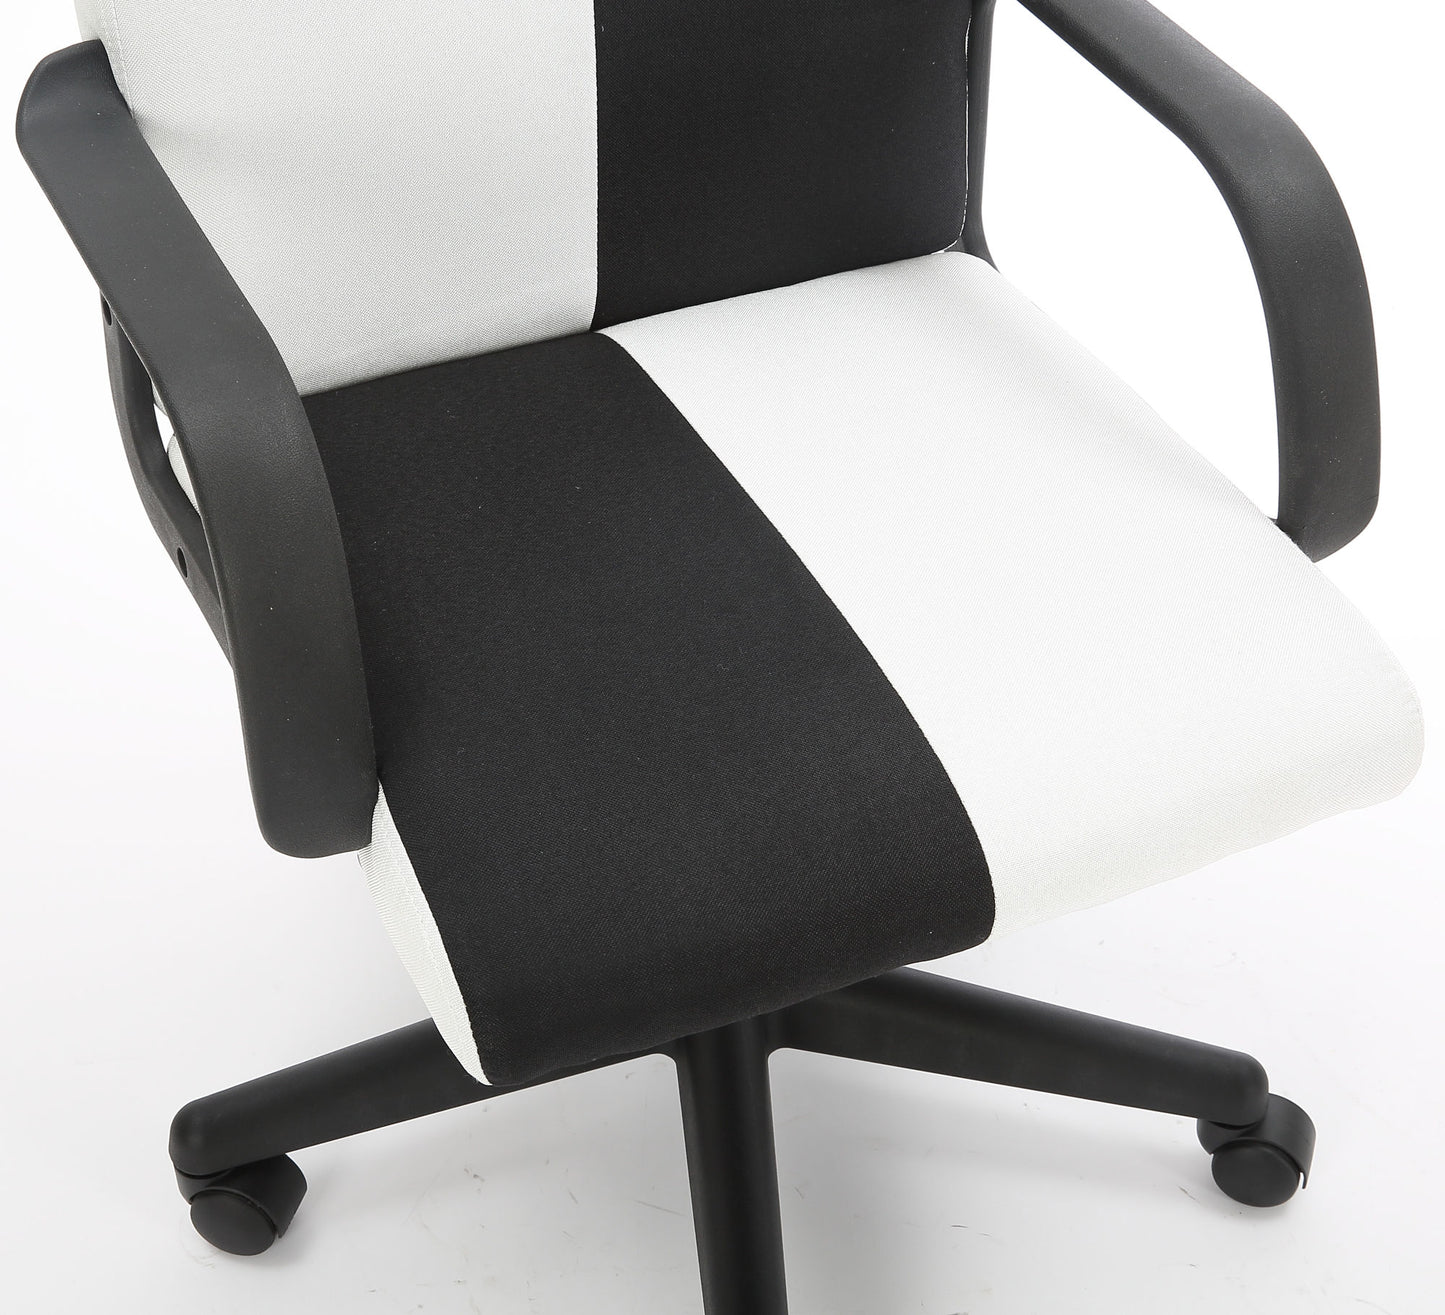 Chessboard office chair;  office chair with adjustable backrest armrest;  suitable for office;  dormitory and study (black and white)